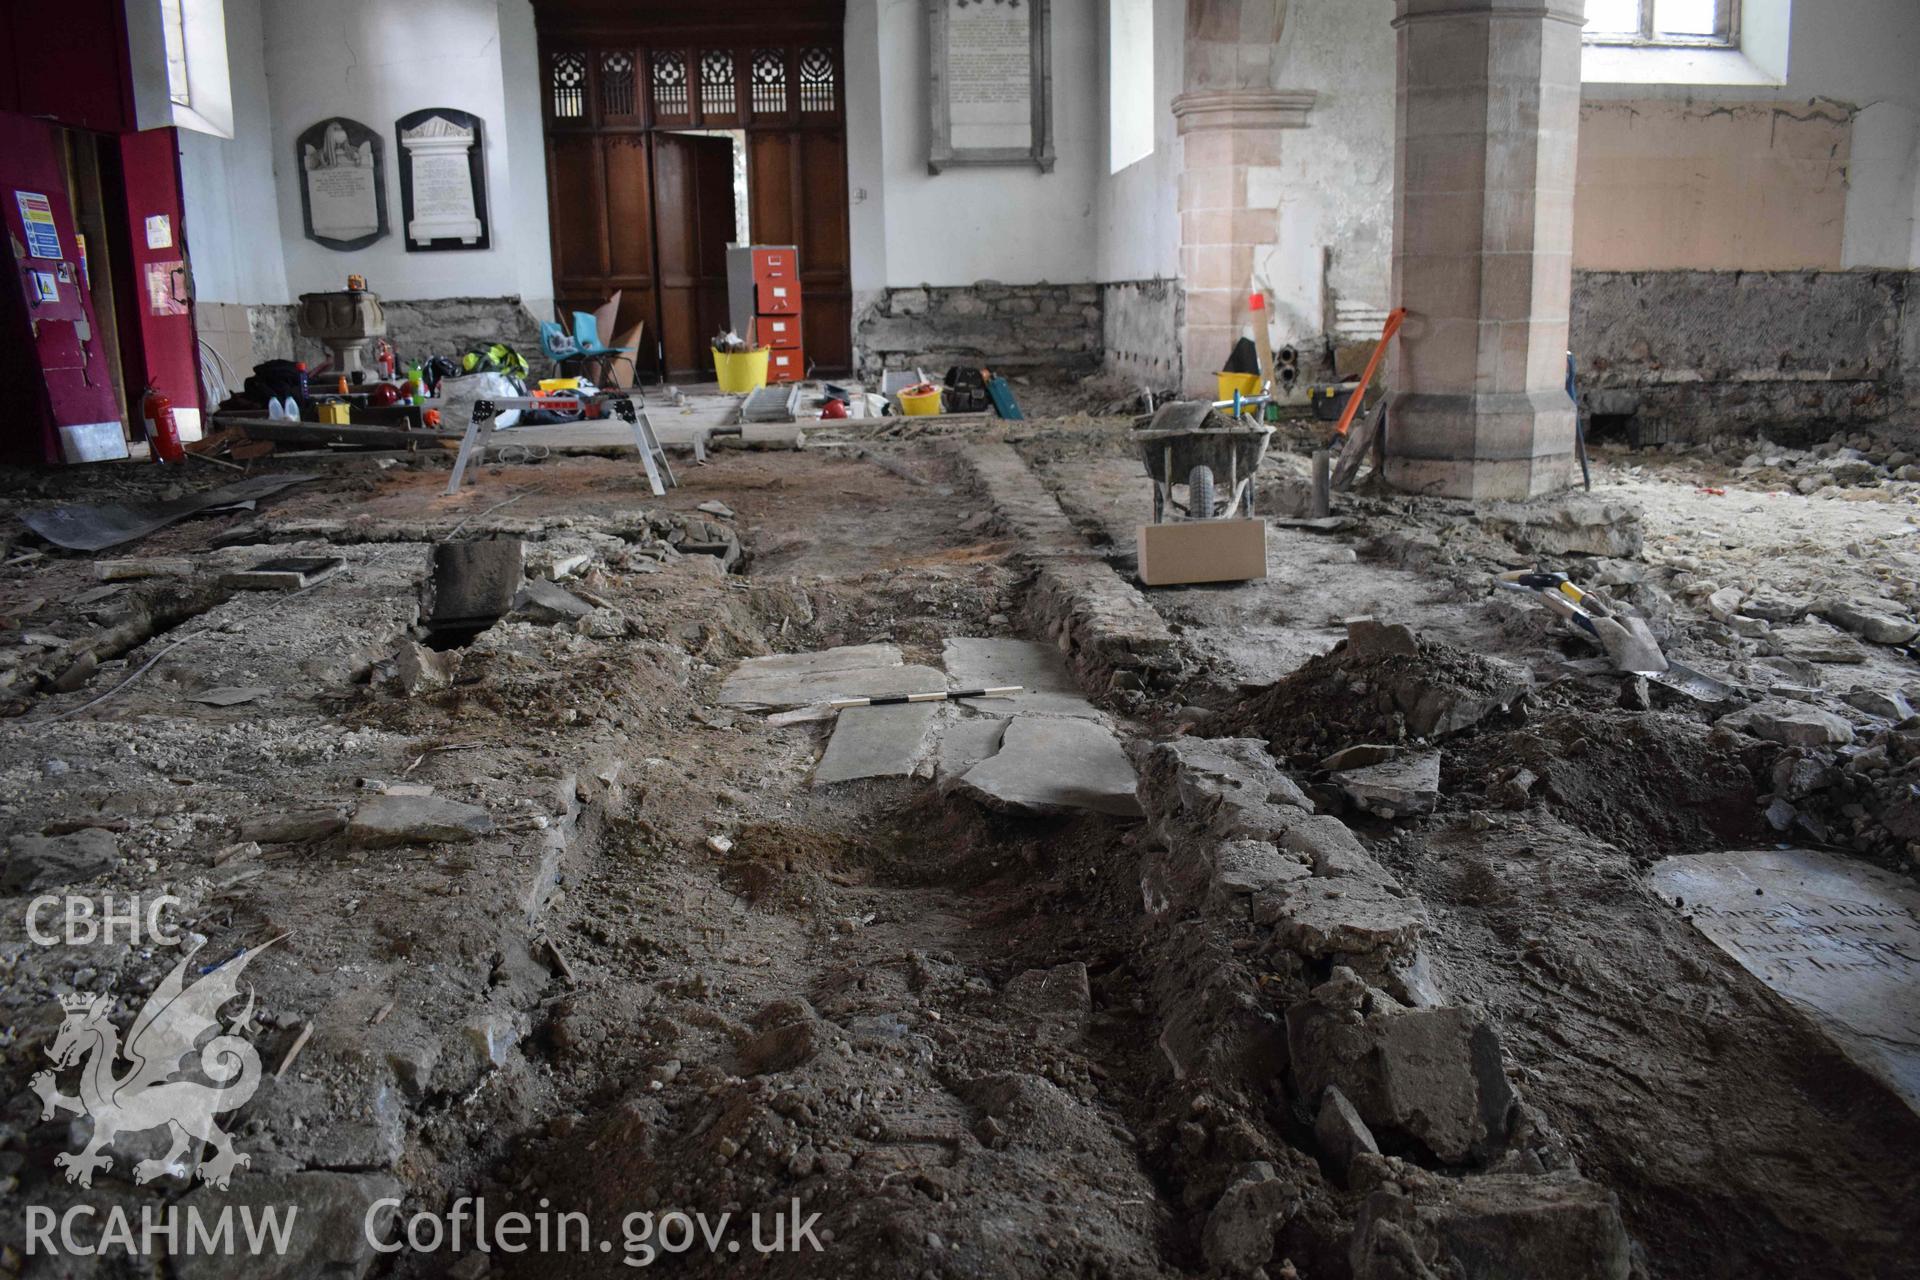 Photograph showing remains of the 18th-century floor within the nave, from the east. taken during an Archaeological Watching Brief carried out during refurbishment works at St Grwst’s Church and Gwydir Chapel, Llanrwst,, by Clwyd-Powys Archaeological Trust in 2019-2020. ref: CPAT 4679-0033, Project no. 2399.